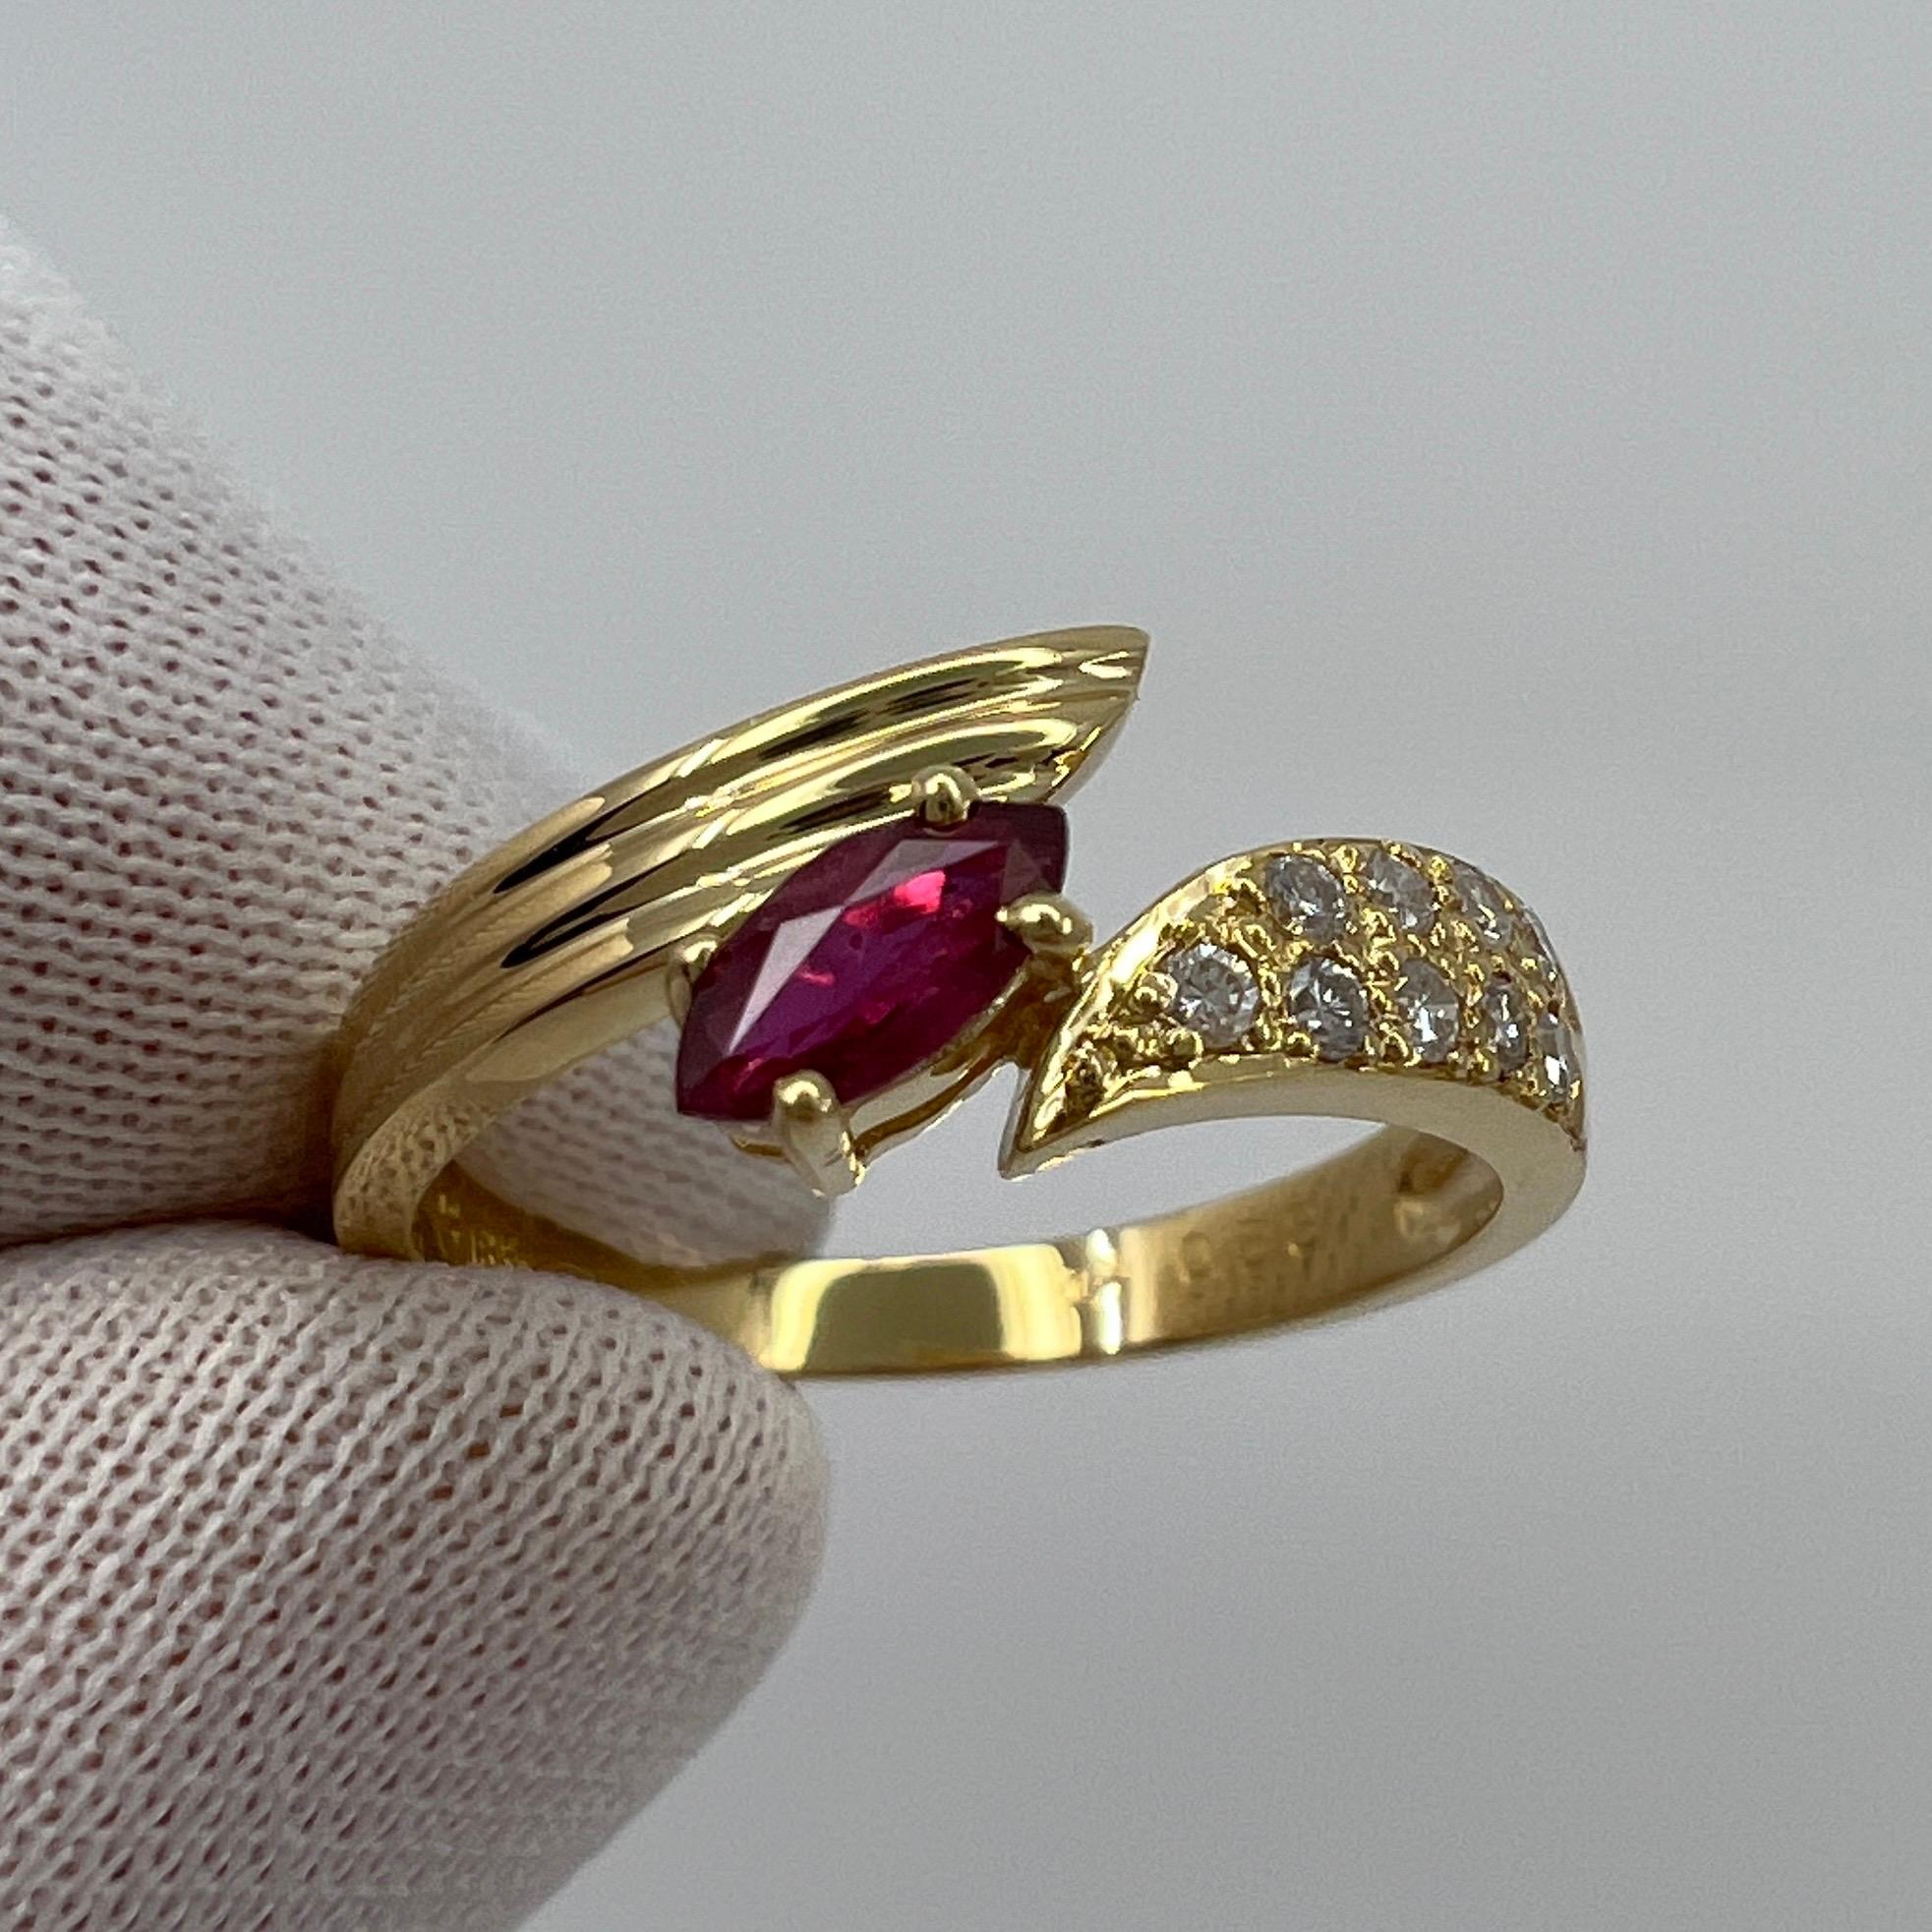 Deep Red Marquise Cut Ruby & Pave Diamond 18k Yellow Gold Fancy Ring.

Unique designed ring featuring a 0.38 carat ruby with a deep red colour. Has an excellent marquise/navette cut and very good clarity, with only some small natural inclusions